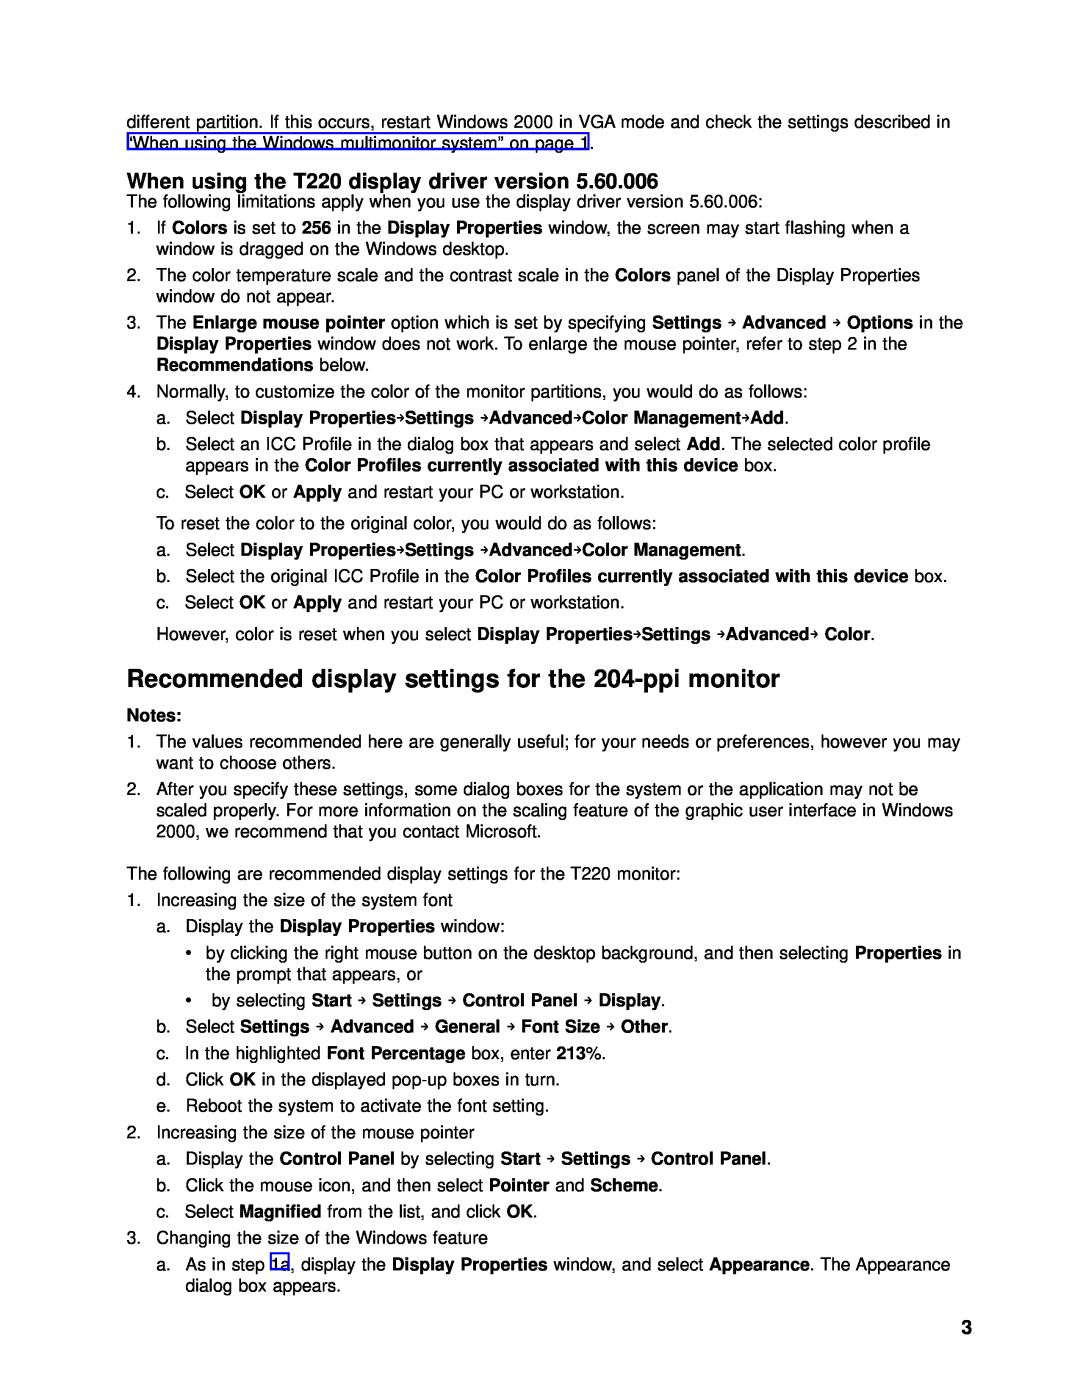 IBM 07N2250 manual Recommended display settings for the 204-ppi monitor, When using the T220 display driver version 